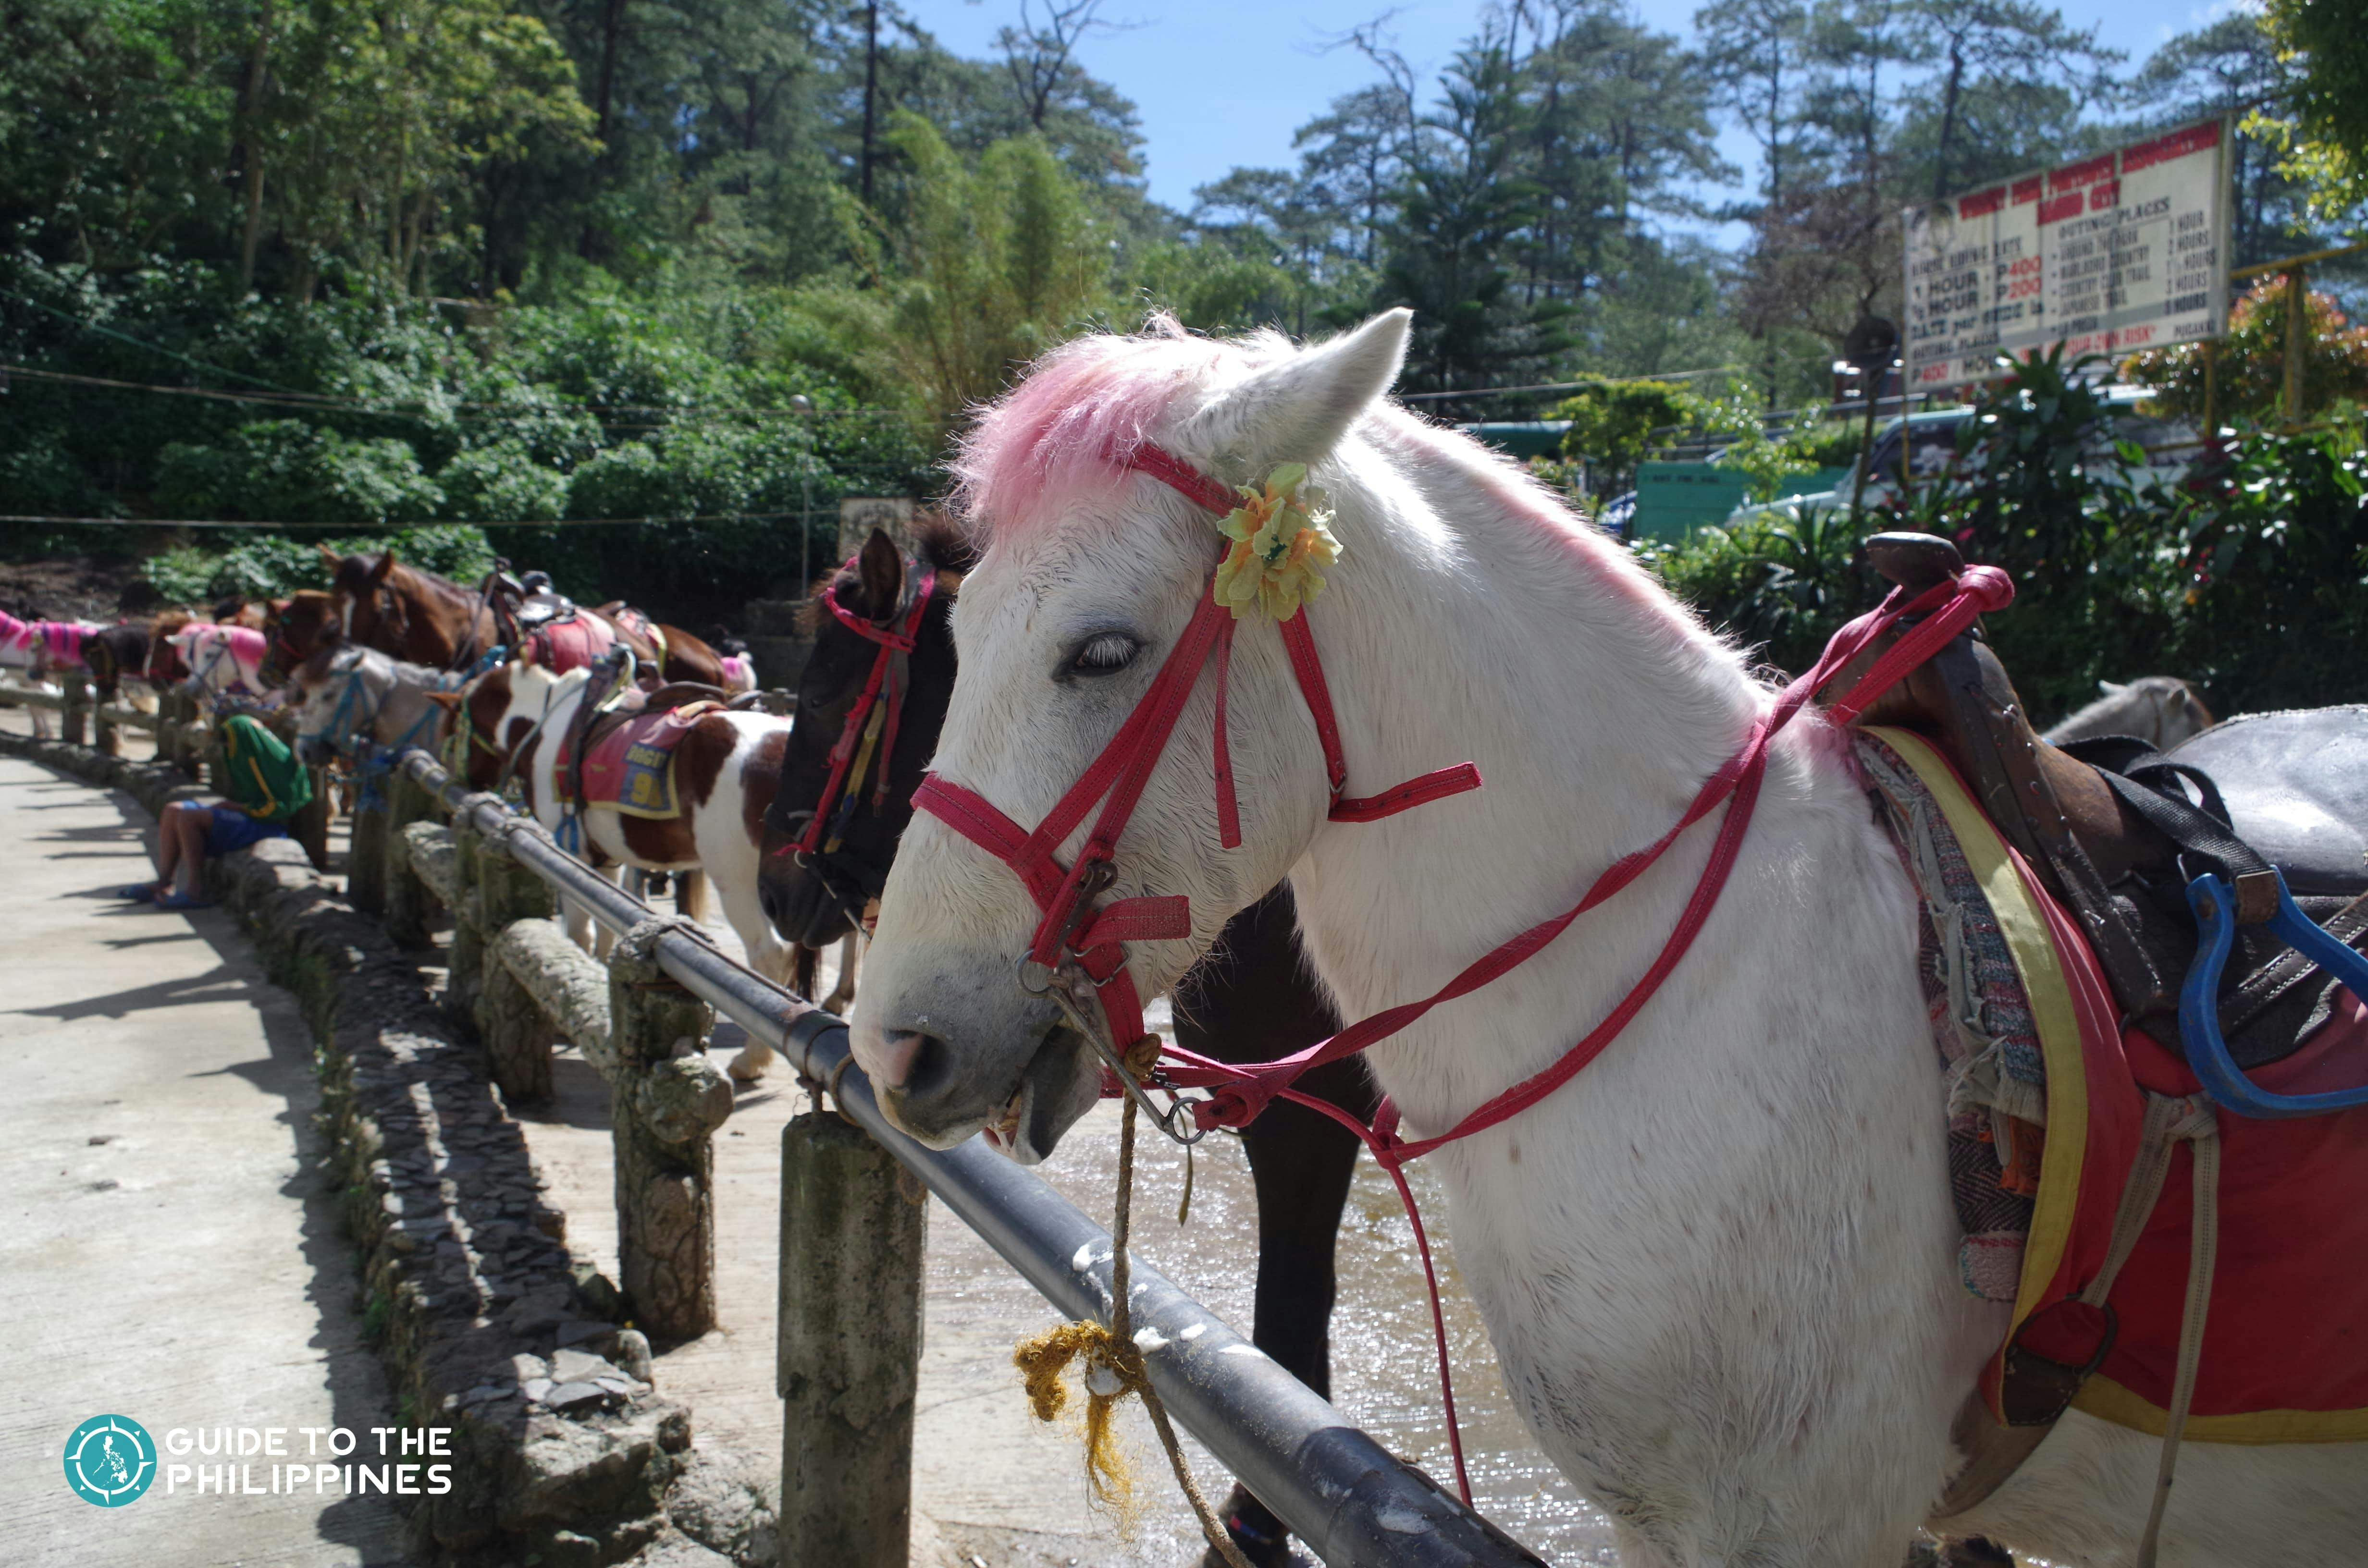 Horses at Wright Park in Baguio City